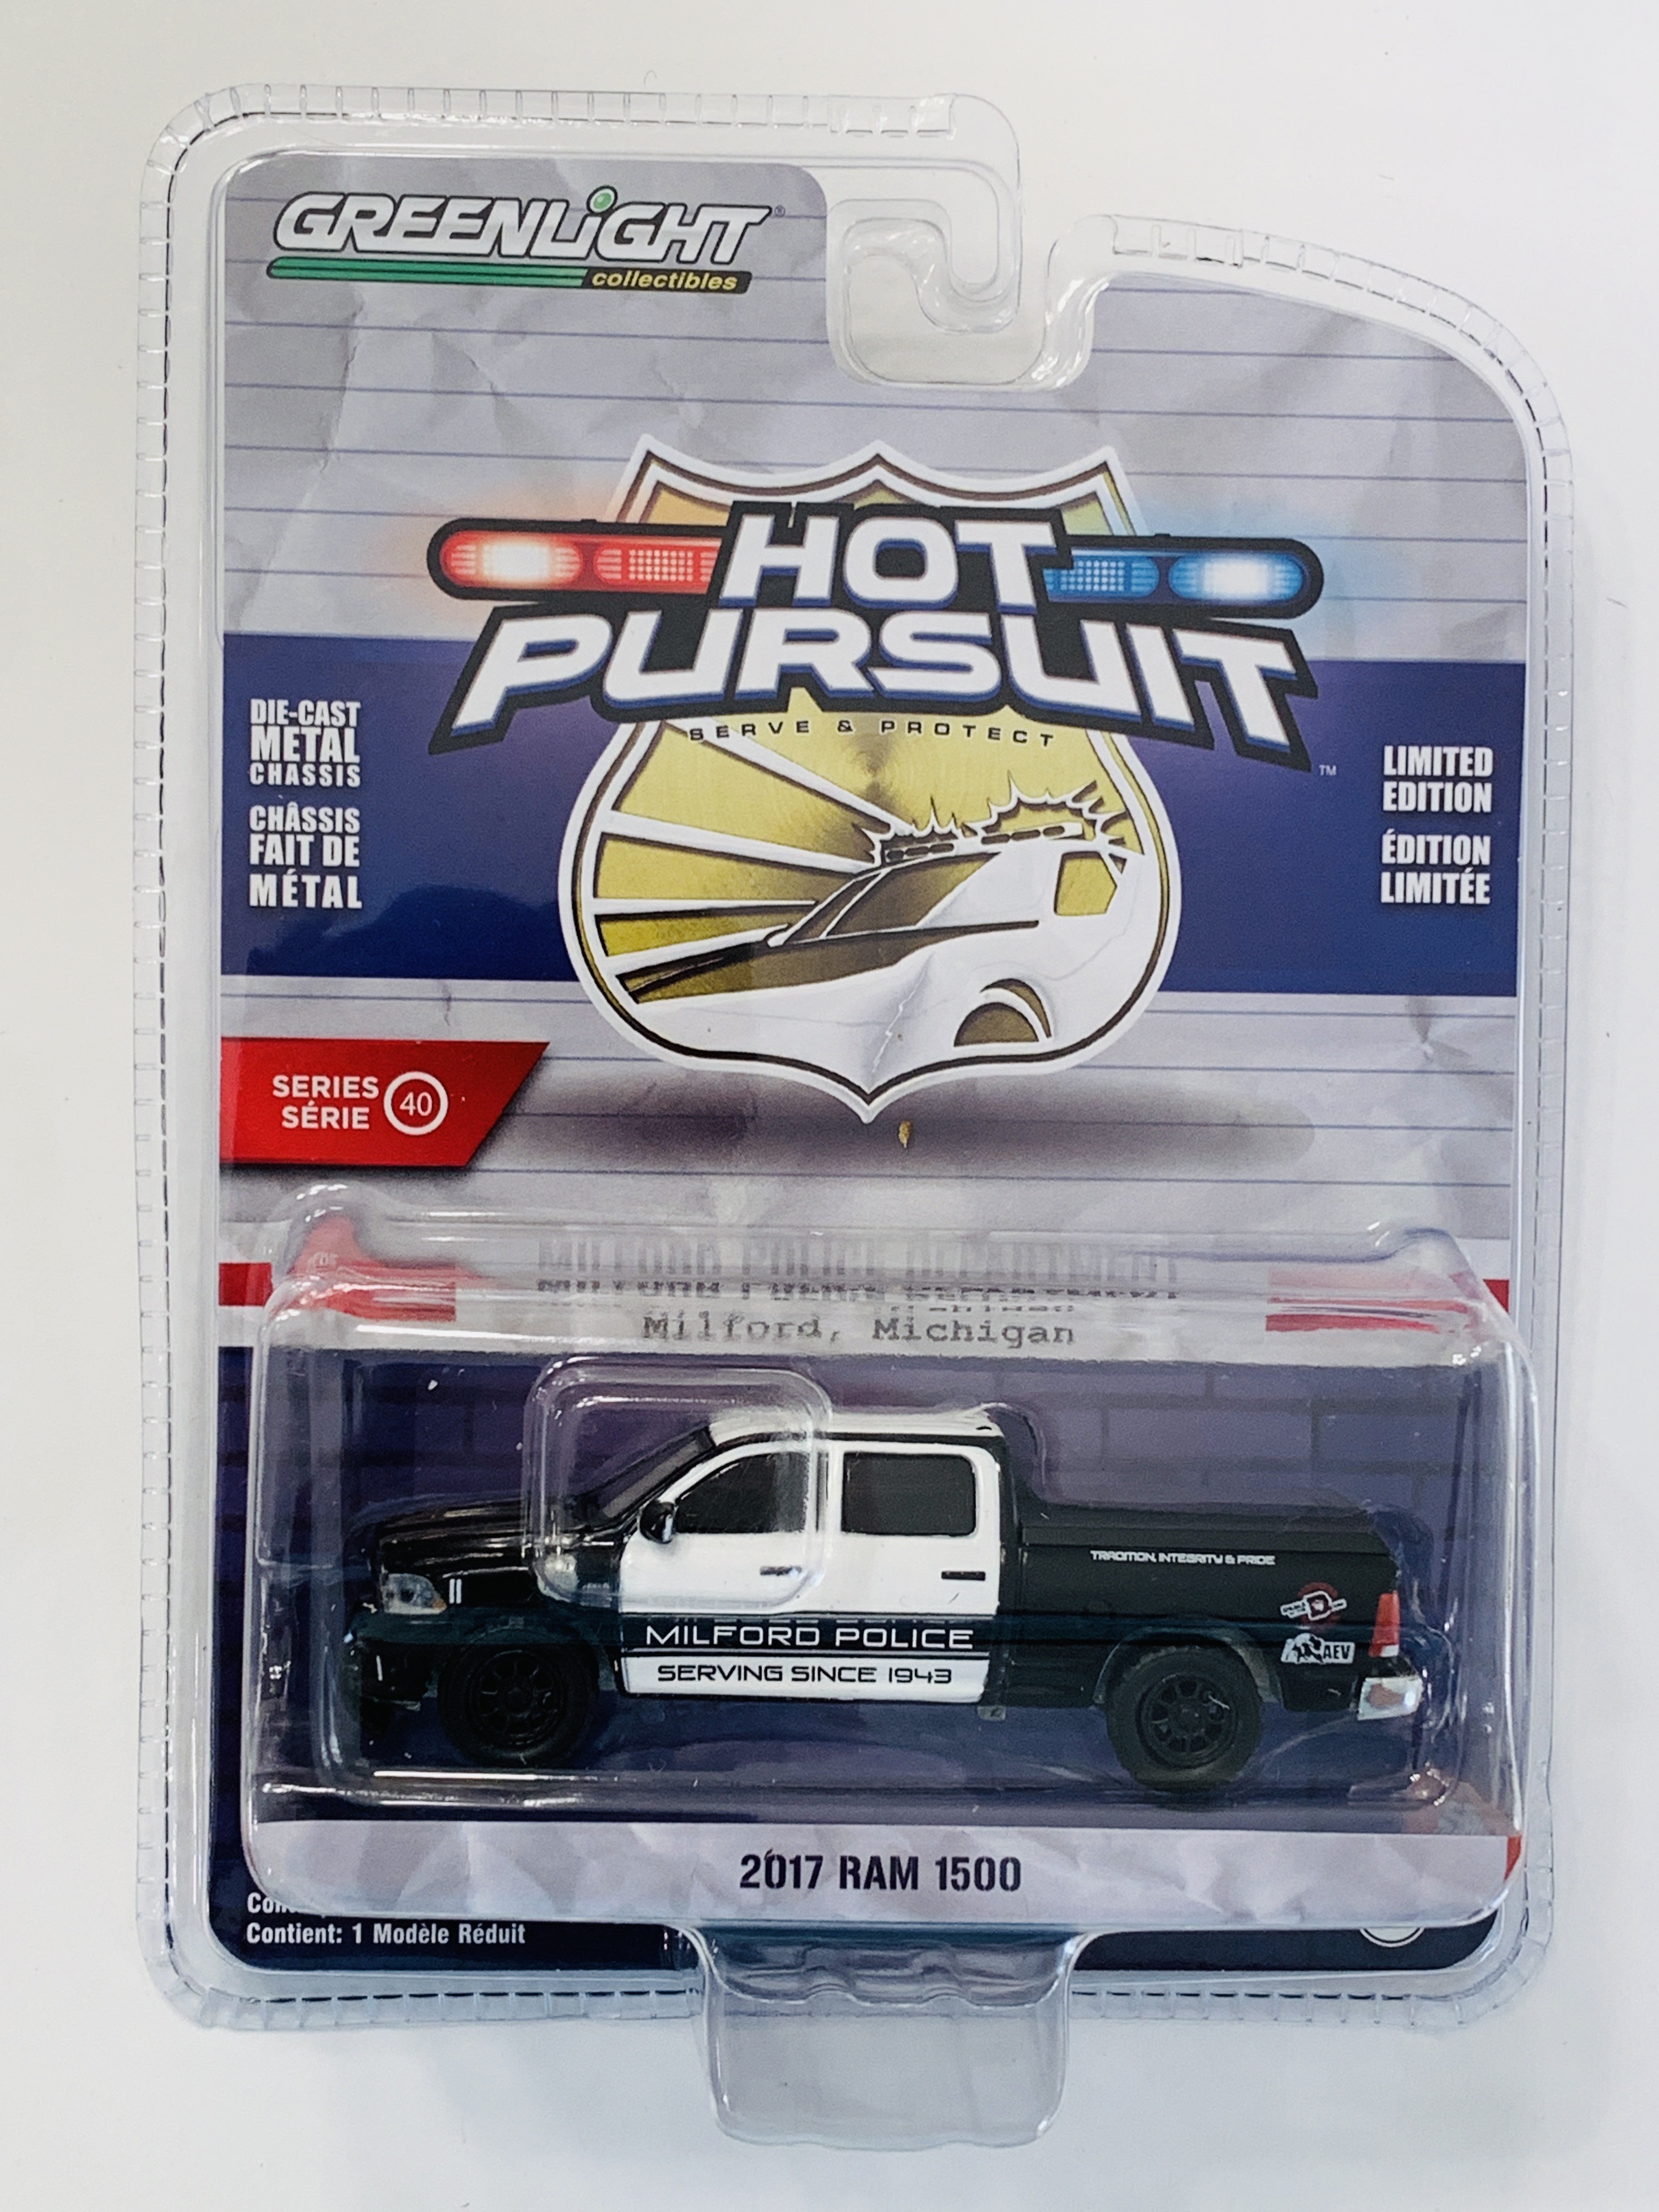 Greenlight Hot Pursuit Milford Police Department 2017 RAM 1500